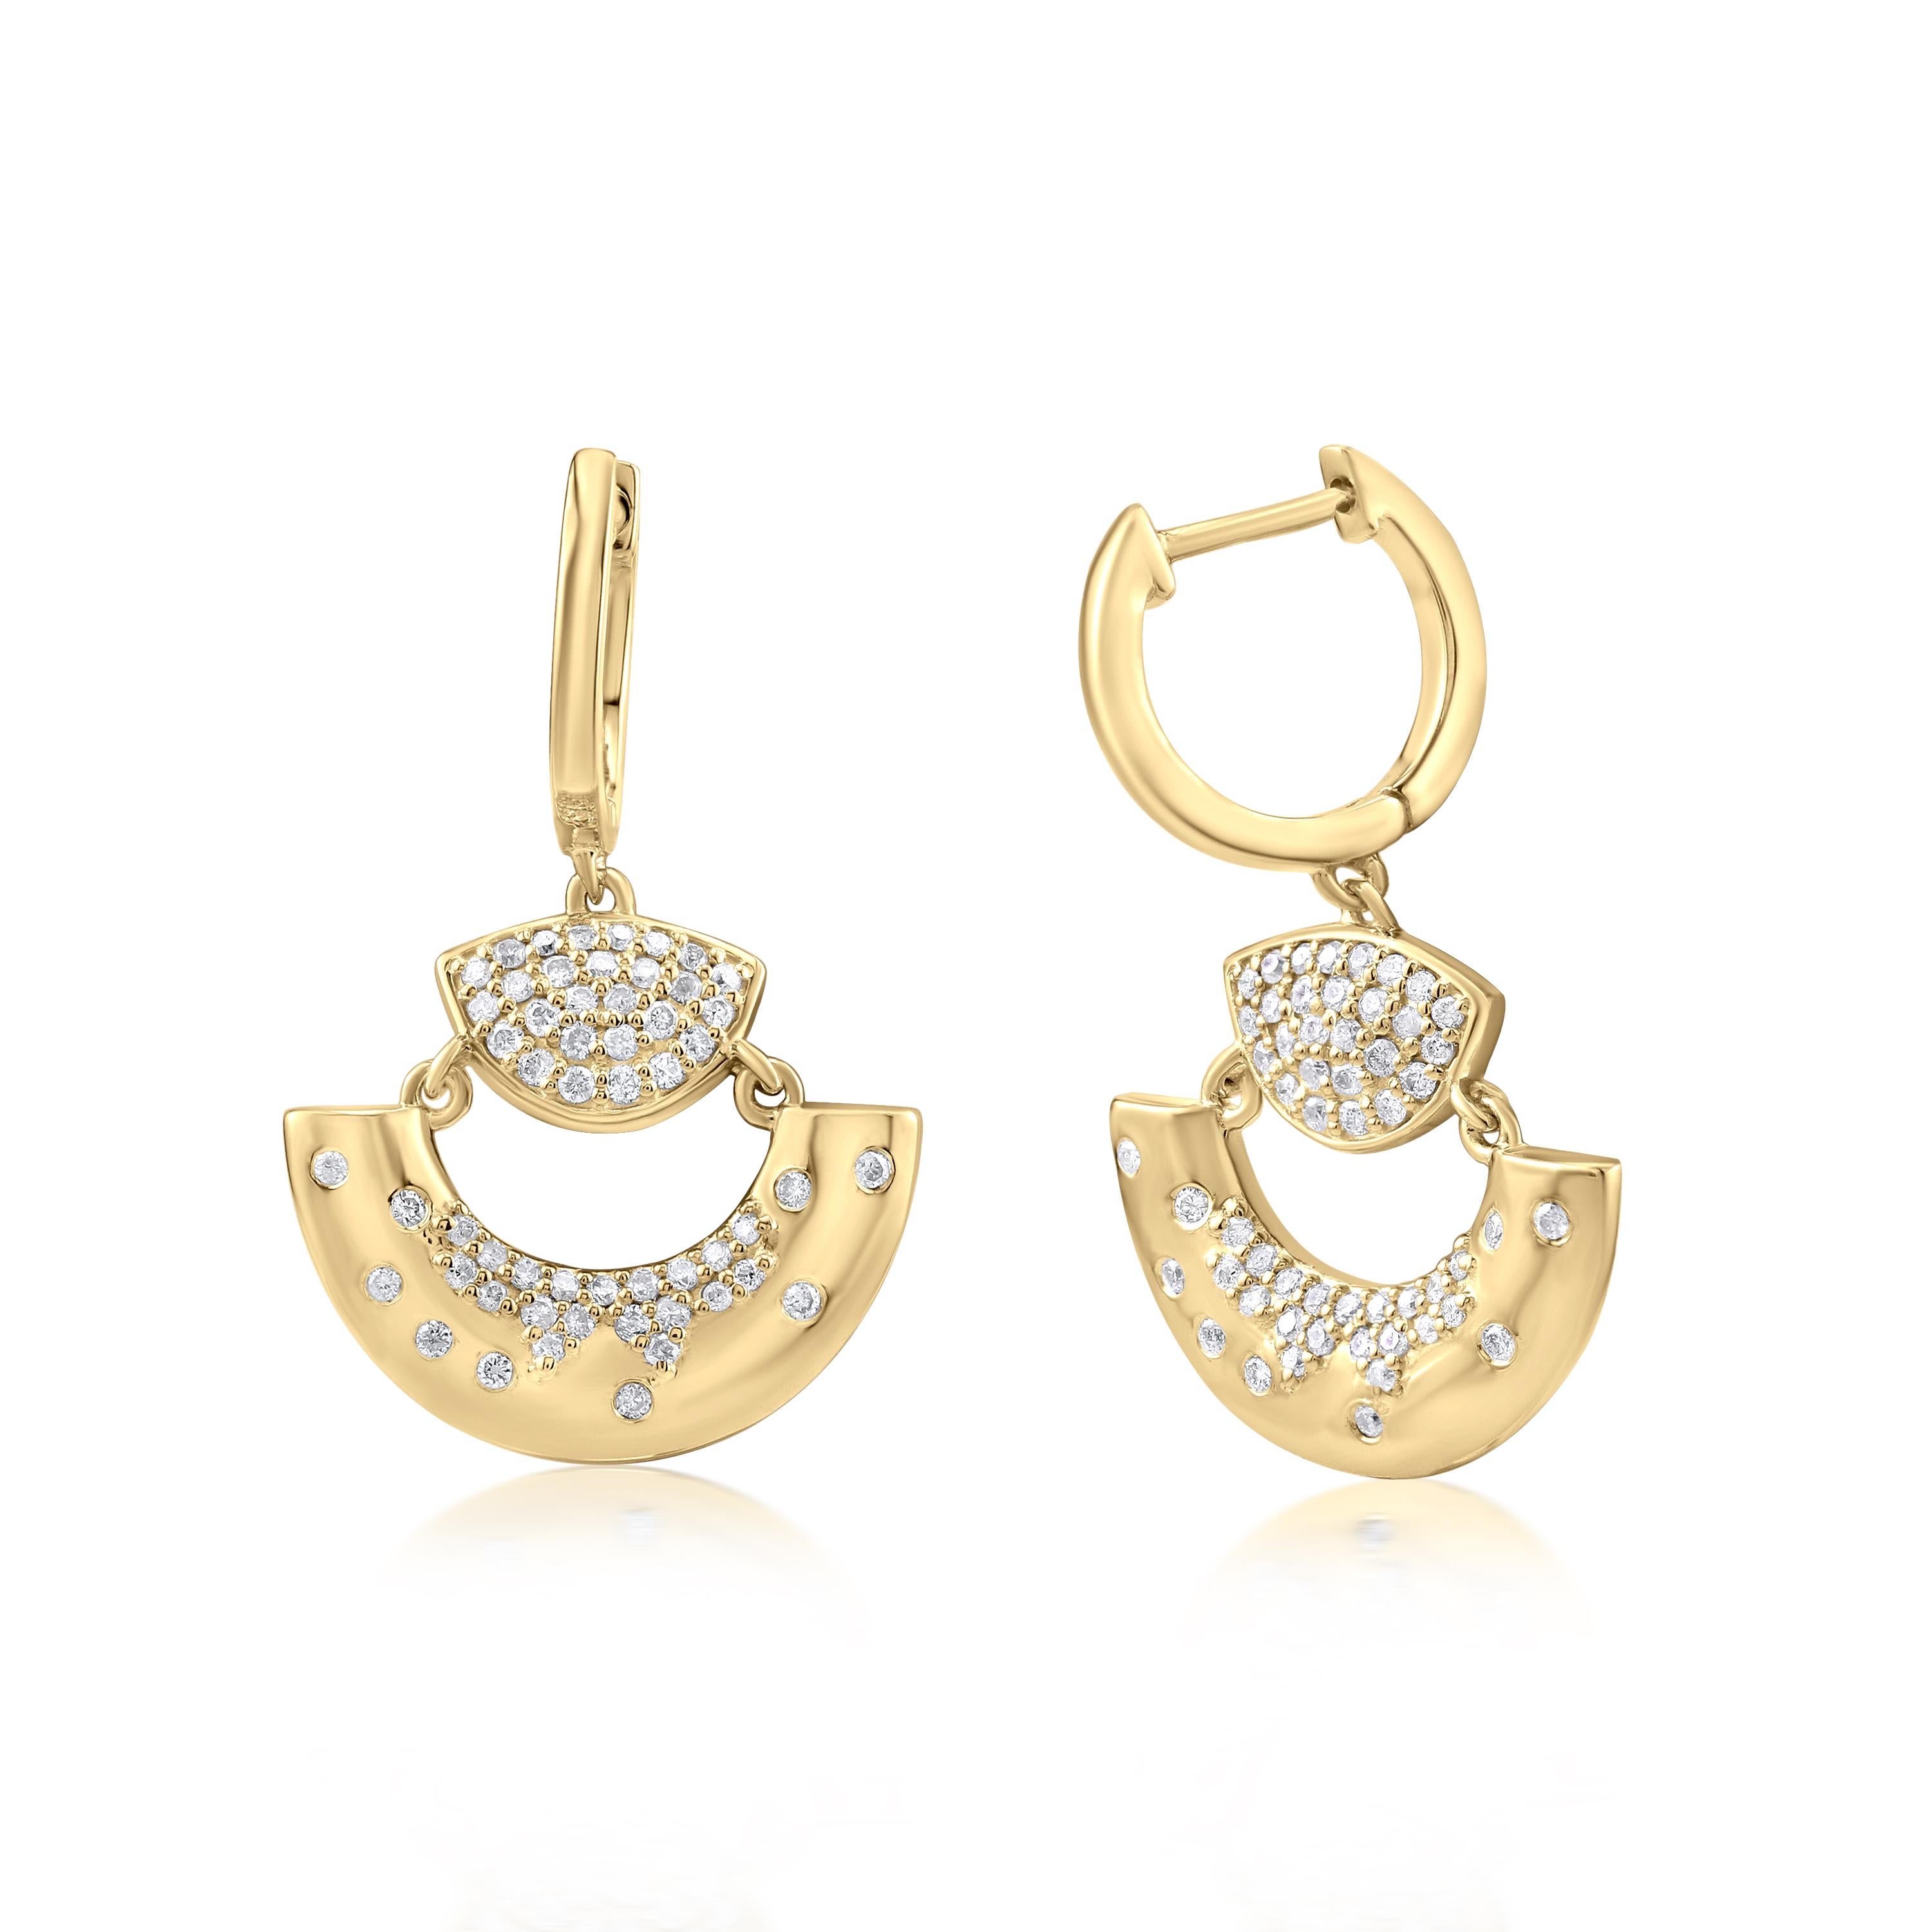 These dazzling diamond hoop and half-circle drop earrings by Gemistry are the perfect way to add a touch of sparkle to any outfit. Expertly crafted from 925 sterling silver, they feature a hoop top with snap bar, half circle drop, and round full-cut